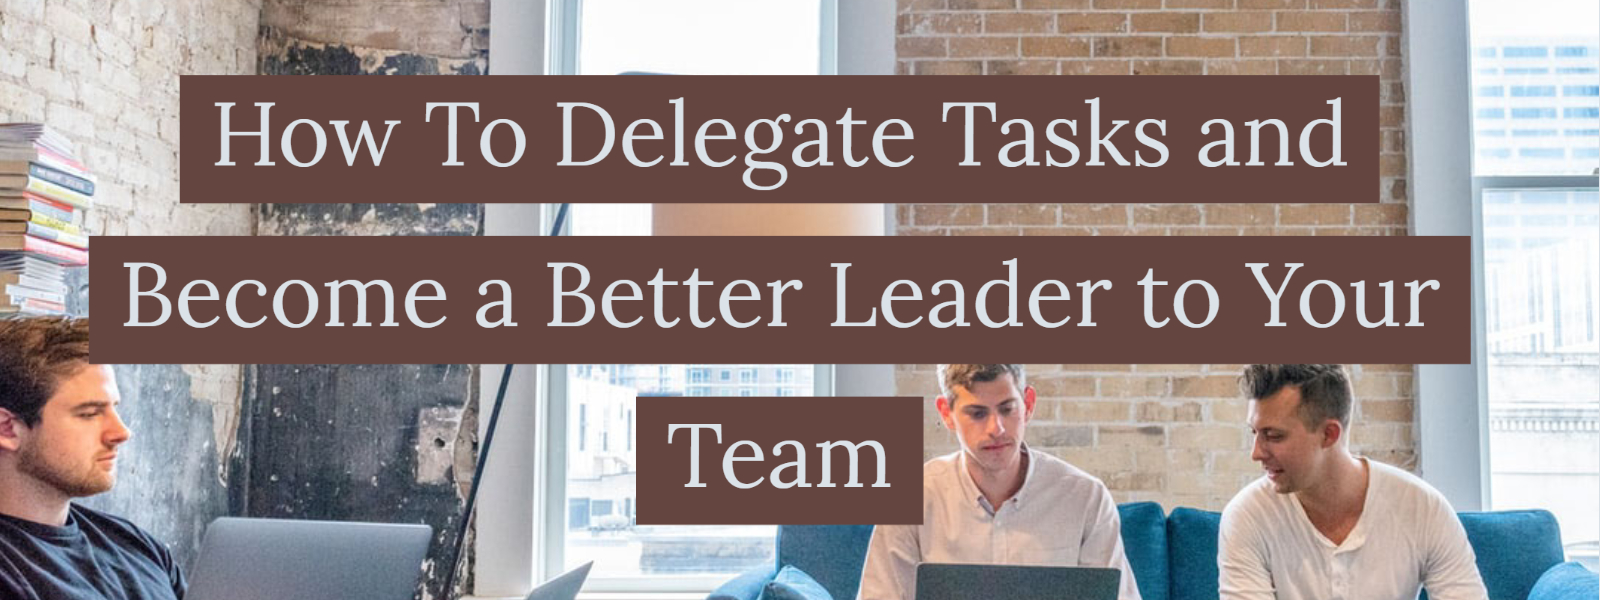 How To Delegate Tasks and Become a Better Leader to Your Team